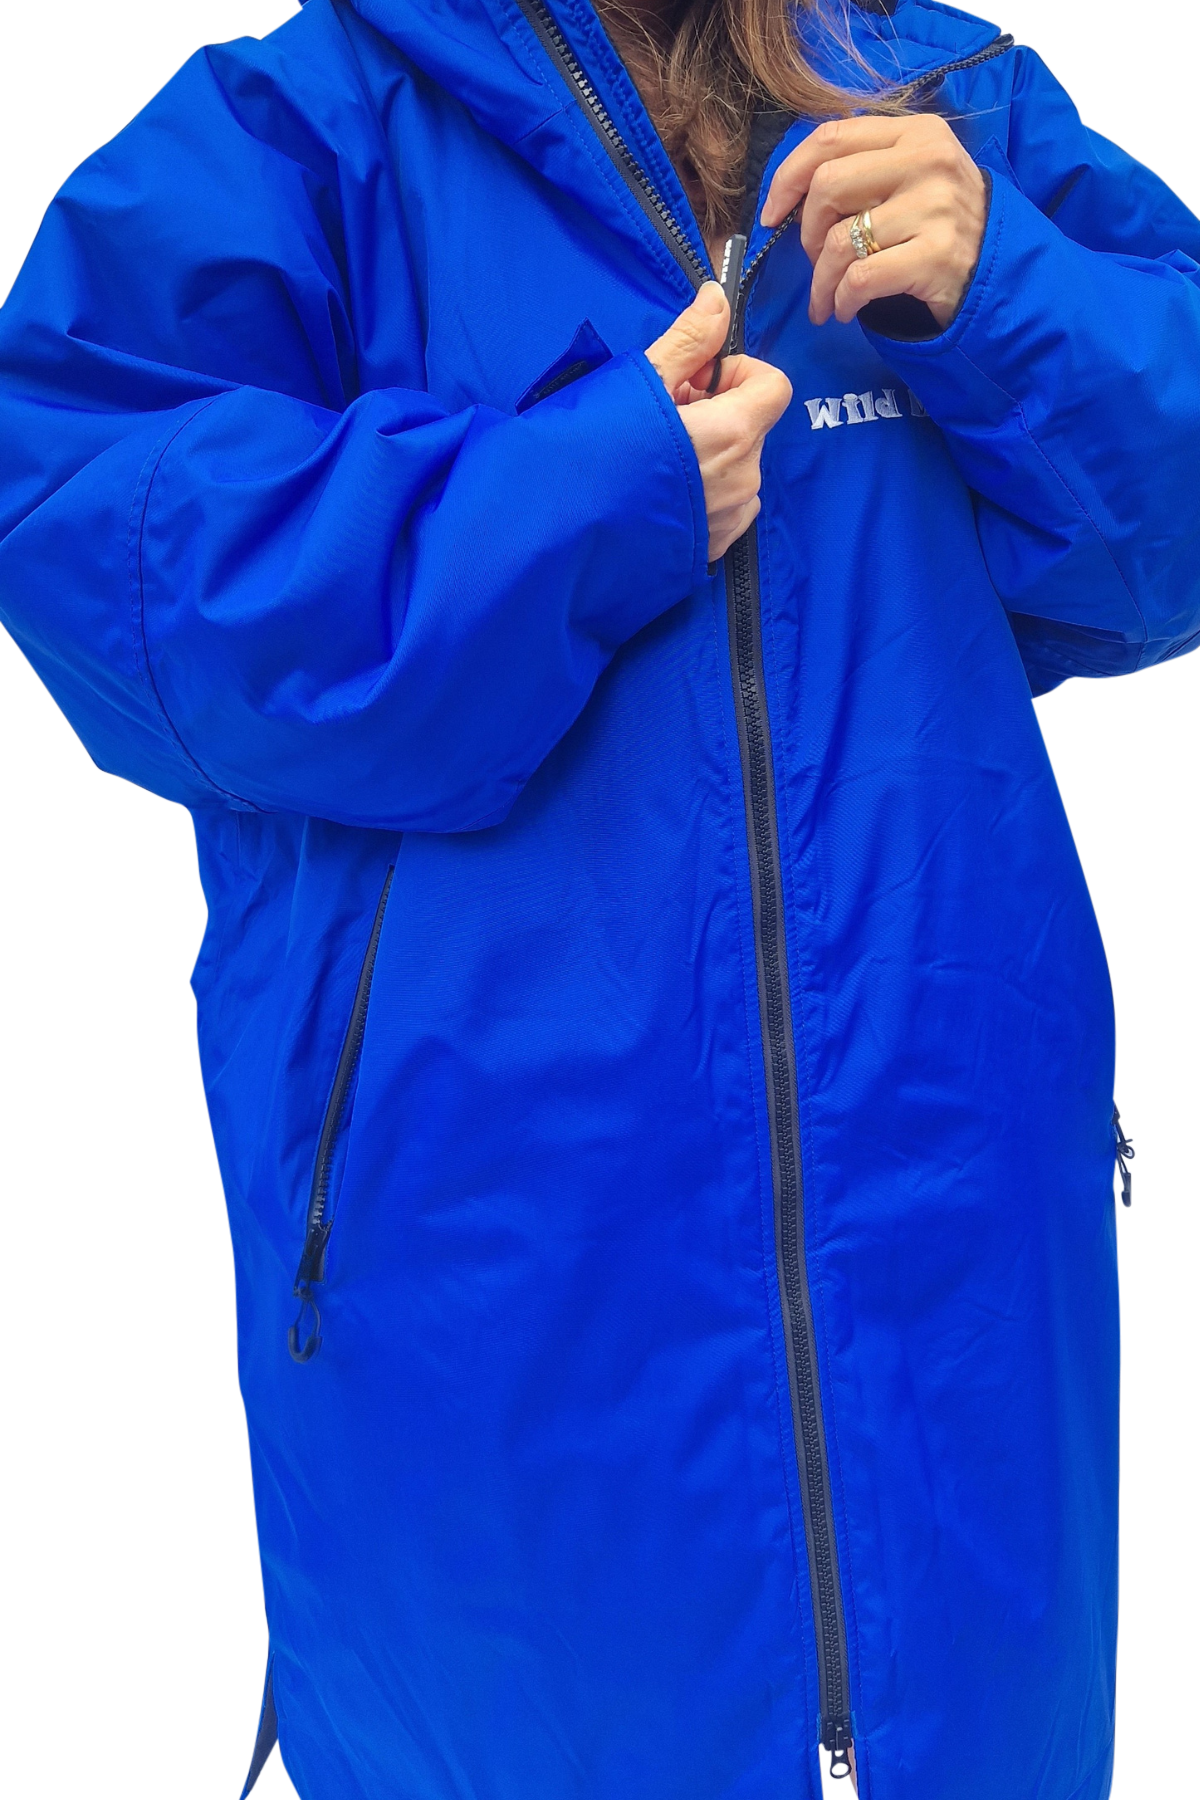 Sapphire Moose Eco - long sleeve changing robe -  electric blue/black